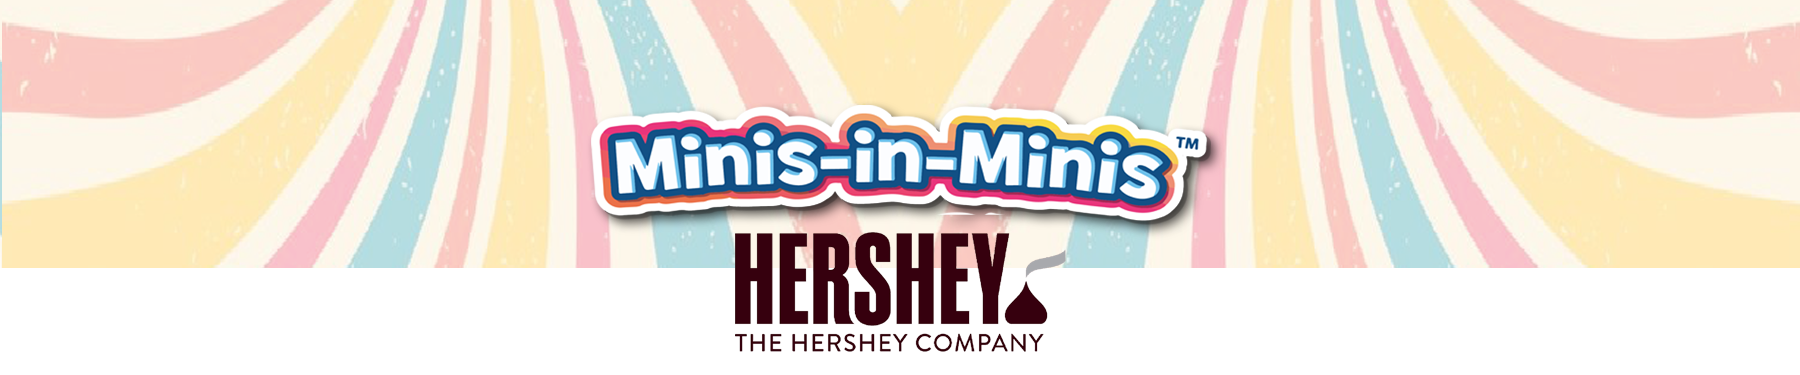 Minis-in-Minis Sugar Buzz Hershey by Super Impulse